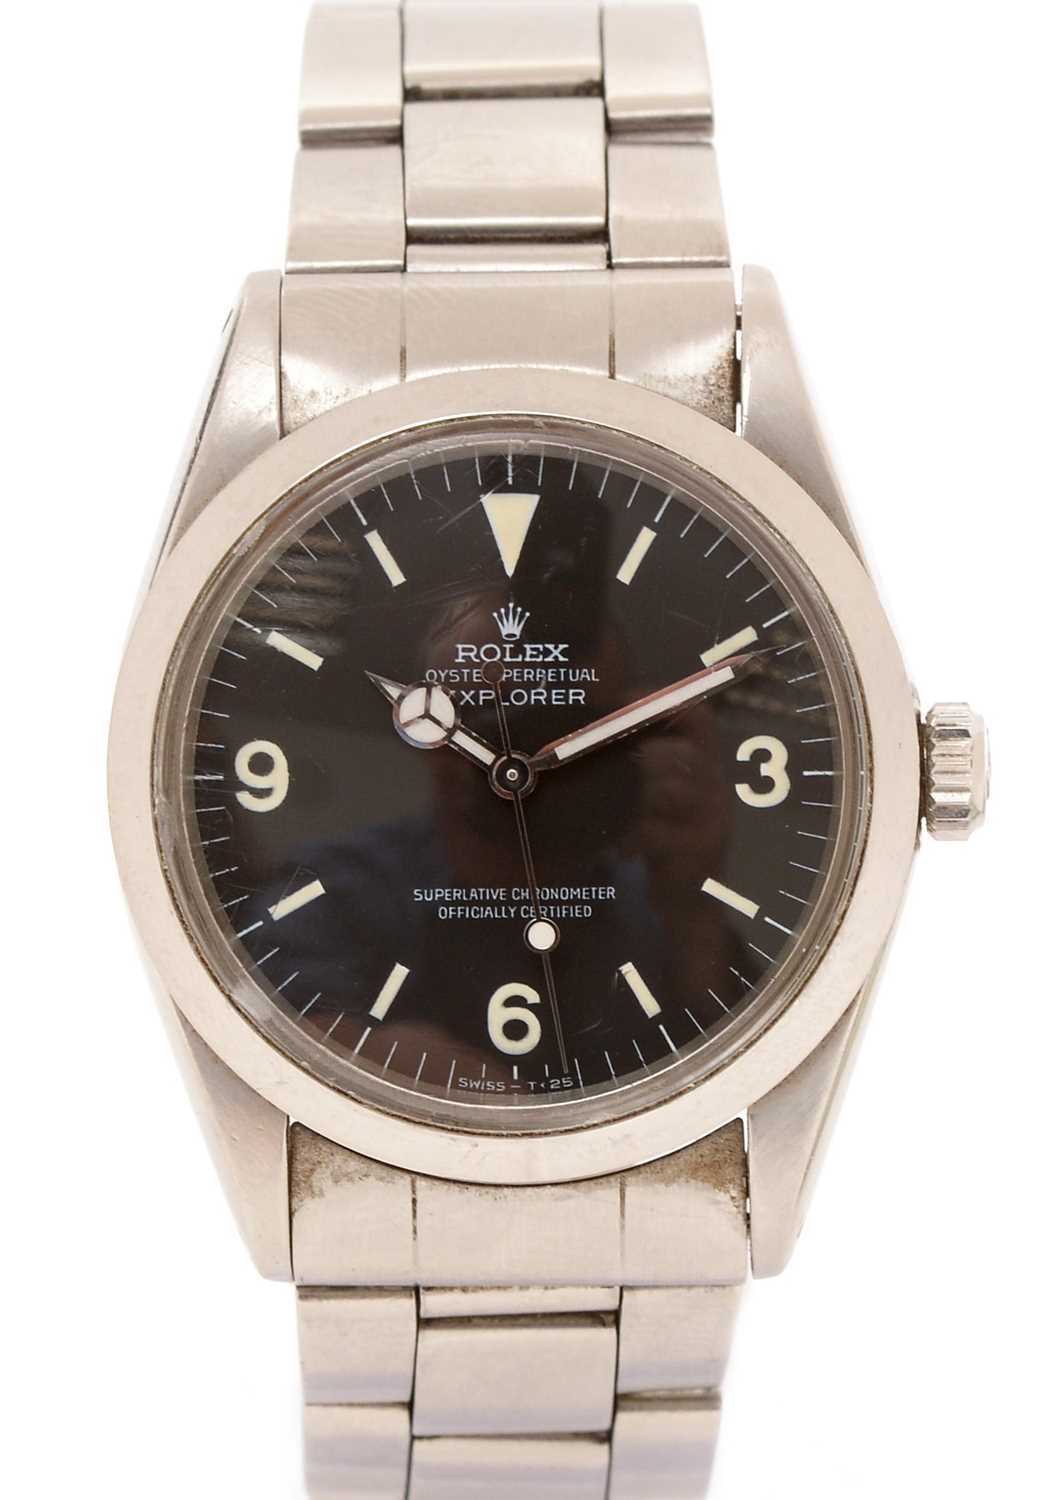 Lot 16 - Rolex Oyster Perpetual Explorer: a stainless steel cased automatic wristwatch